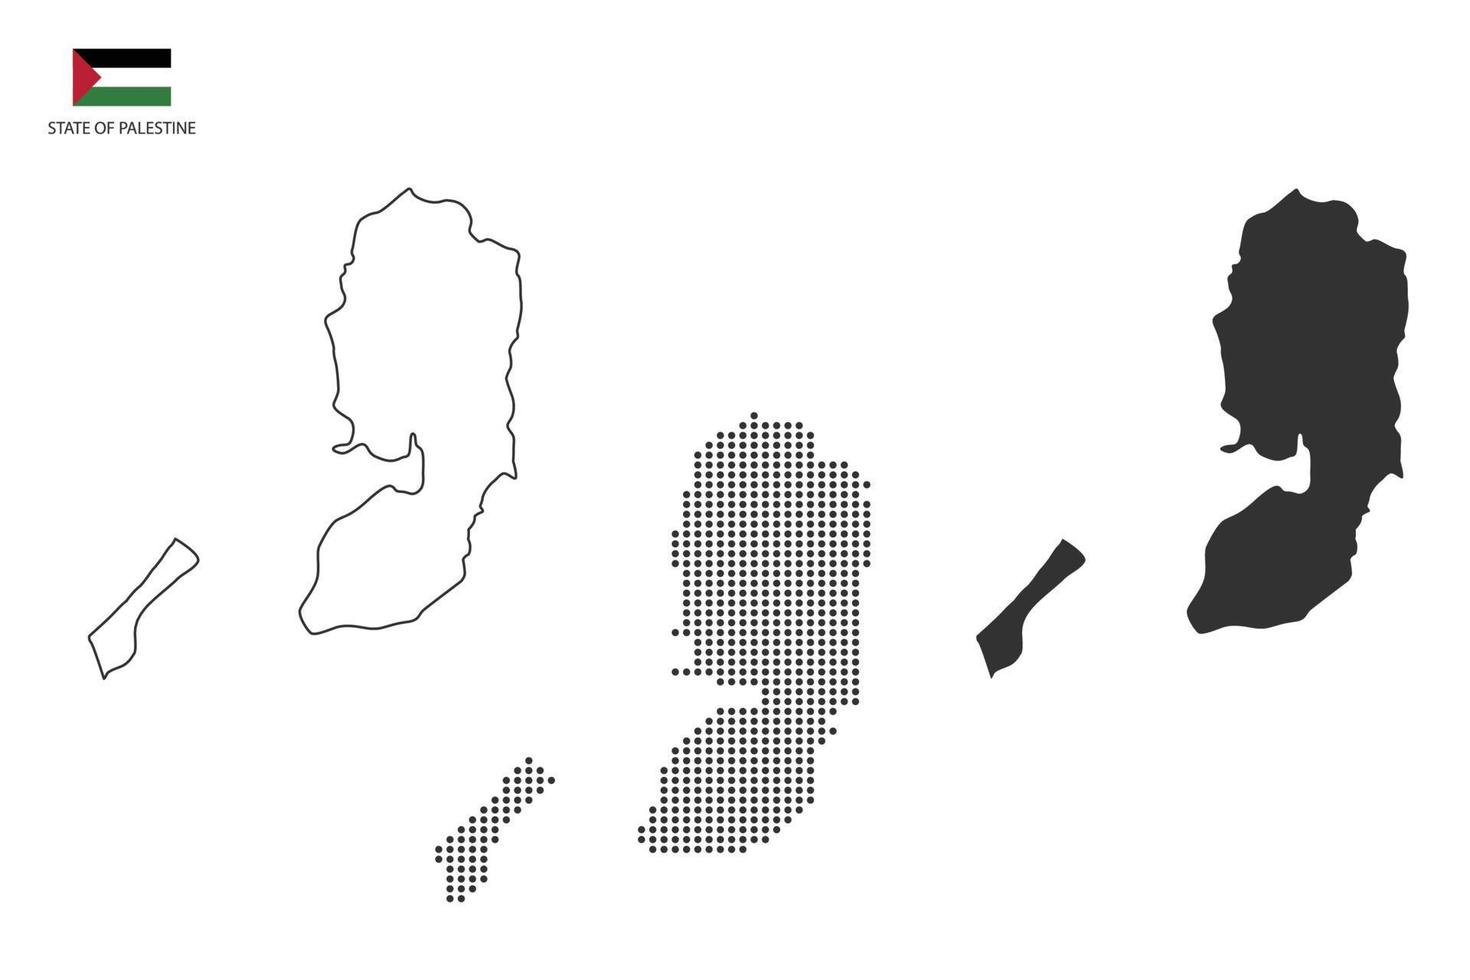 3 versions of State of Palestine map city vector by thin black outline simplicity style, Black dot style and Dark shadow style. All in the white background.